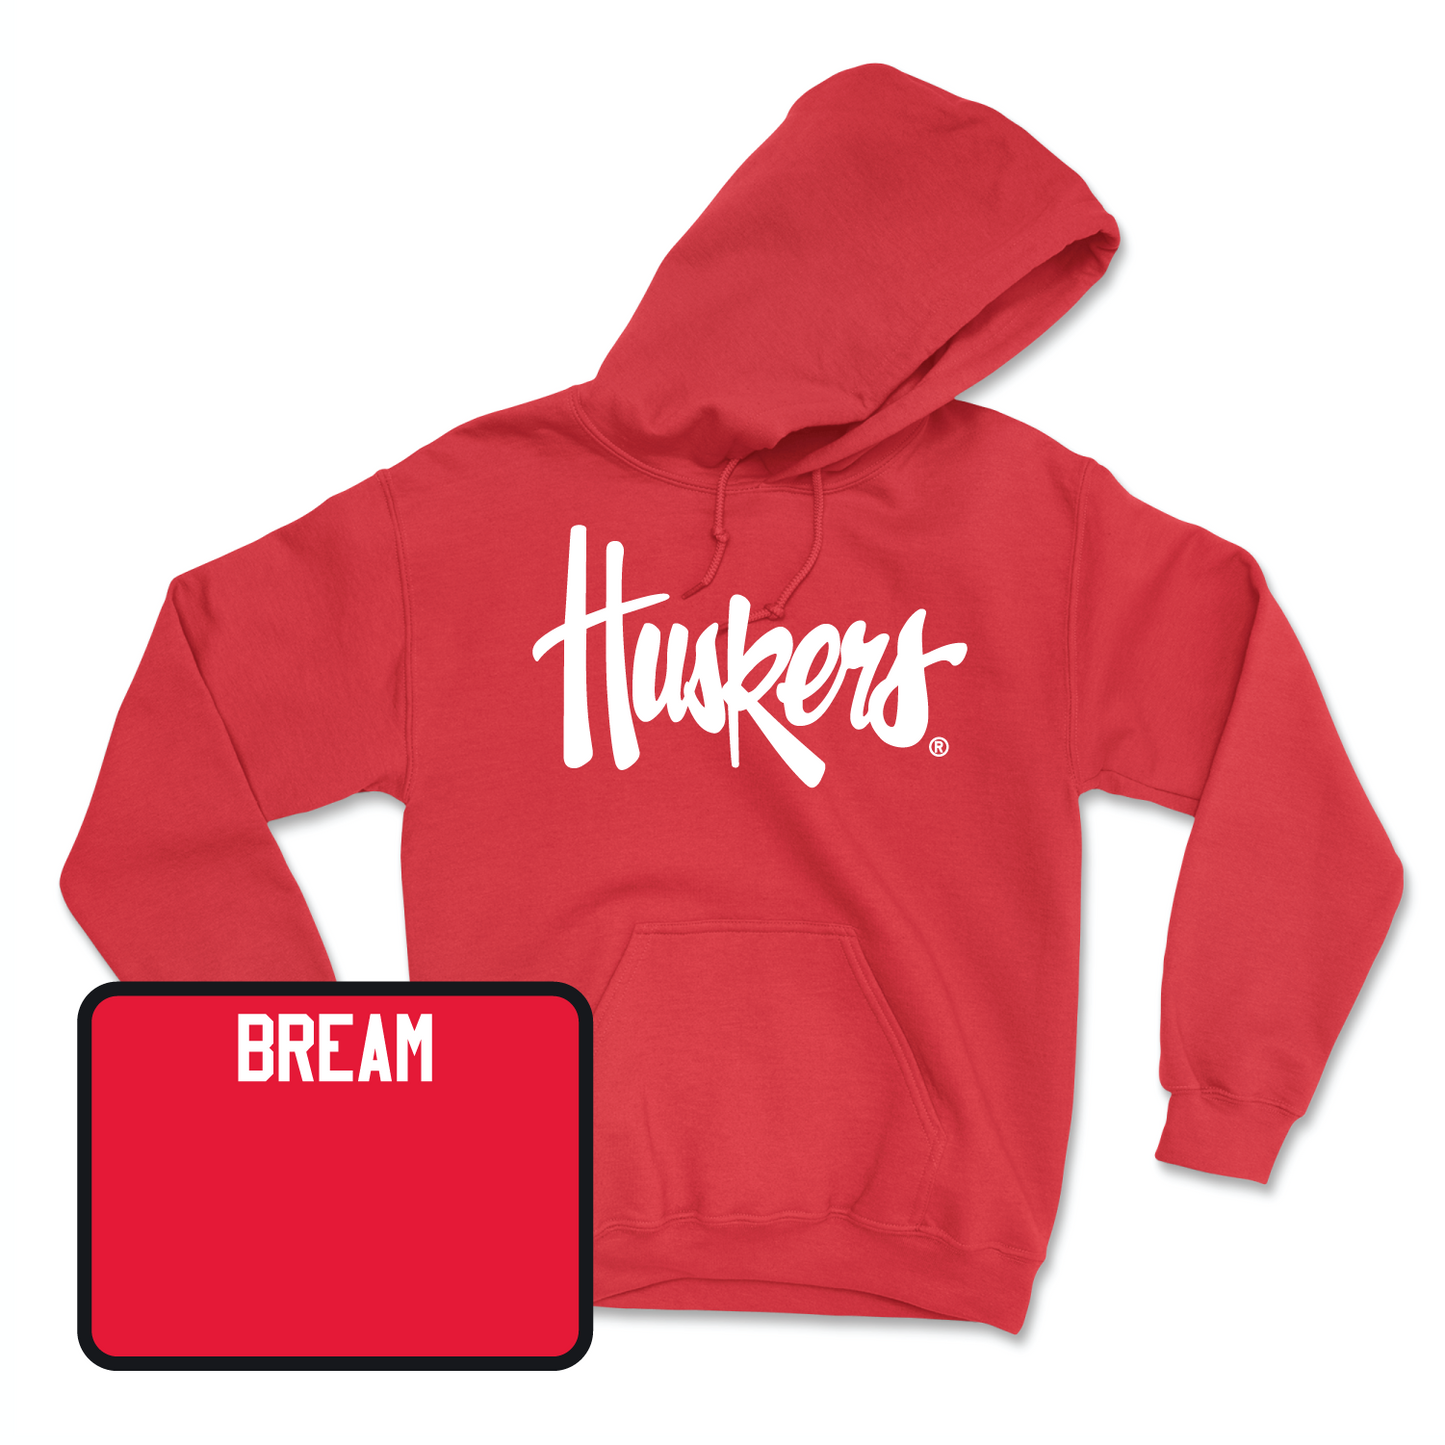 Red Women's Golf Huskers Hoodie 4X-Large / Brooke Bream